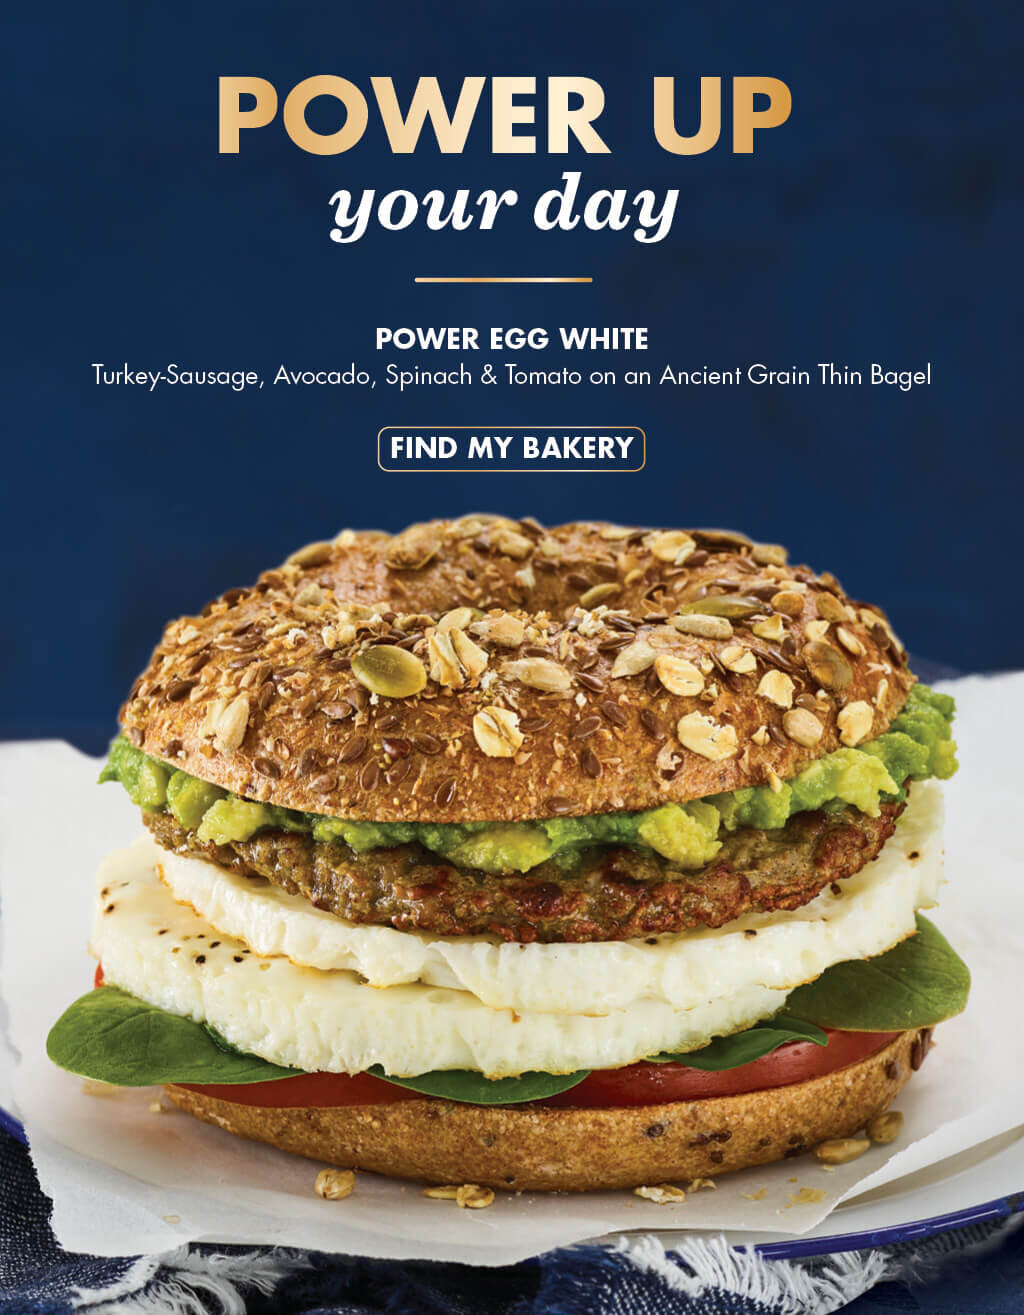 Power up your day with the Power Egg White Bagel Sandwich from Noah's. Click to find your closest bakery.